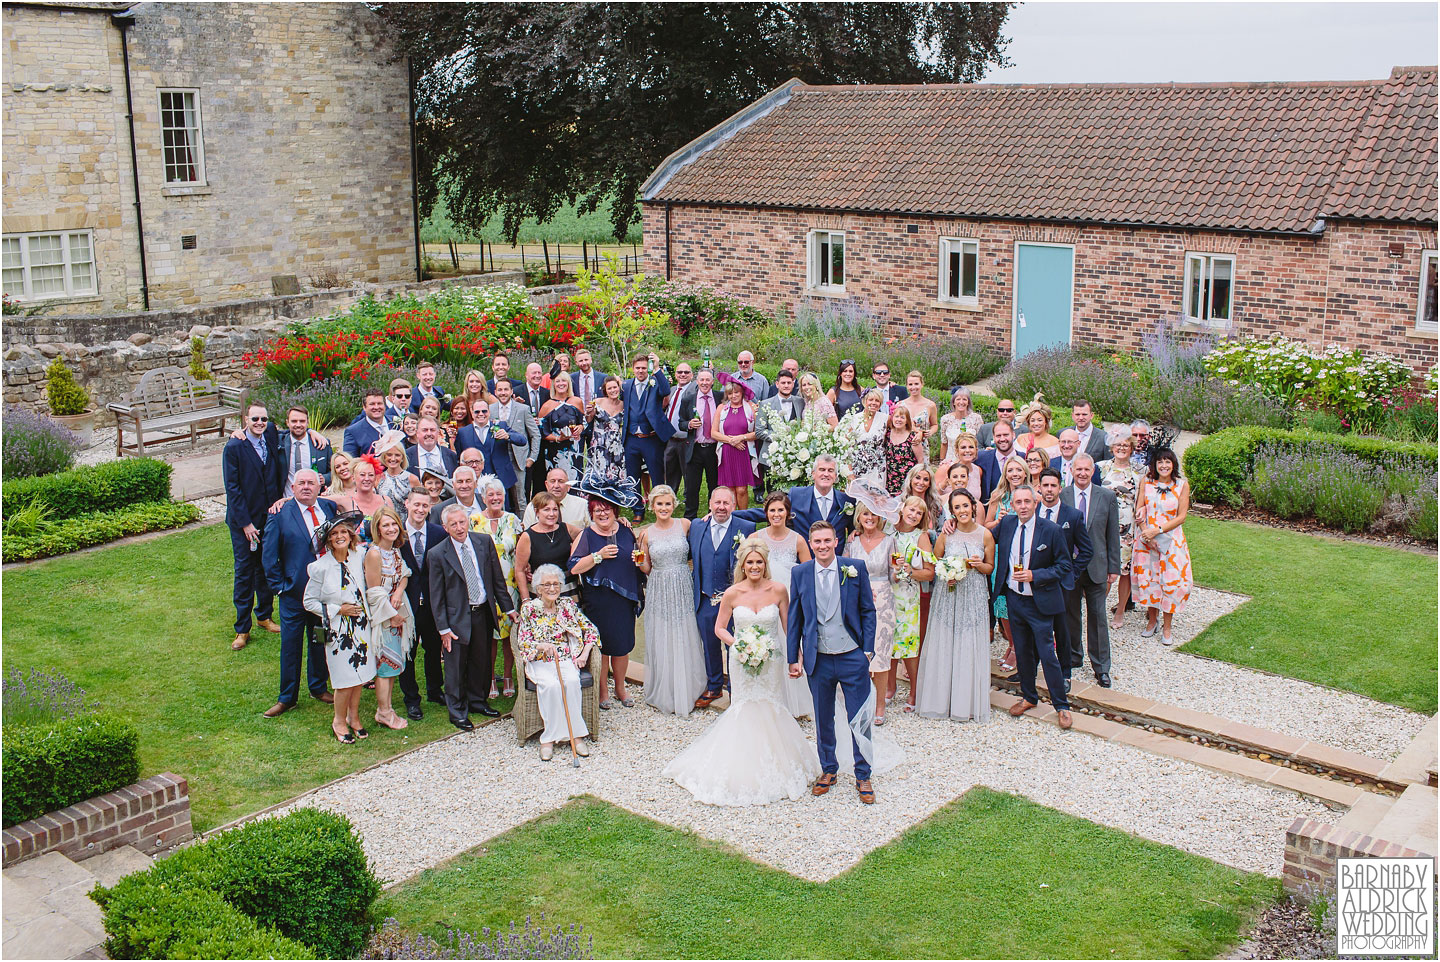 Priory Cottages wedding near Wetherby in Yorkshire